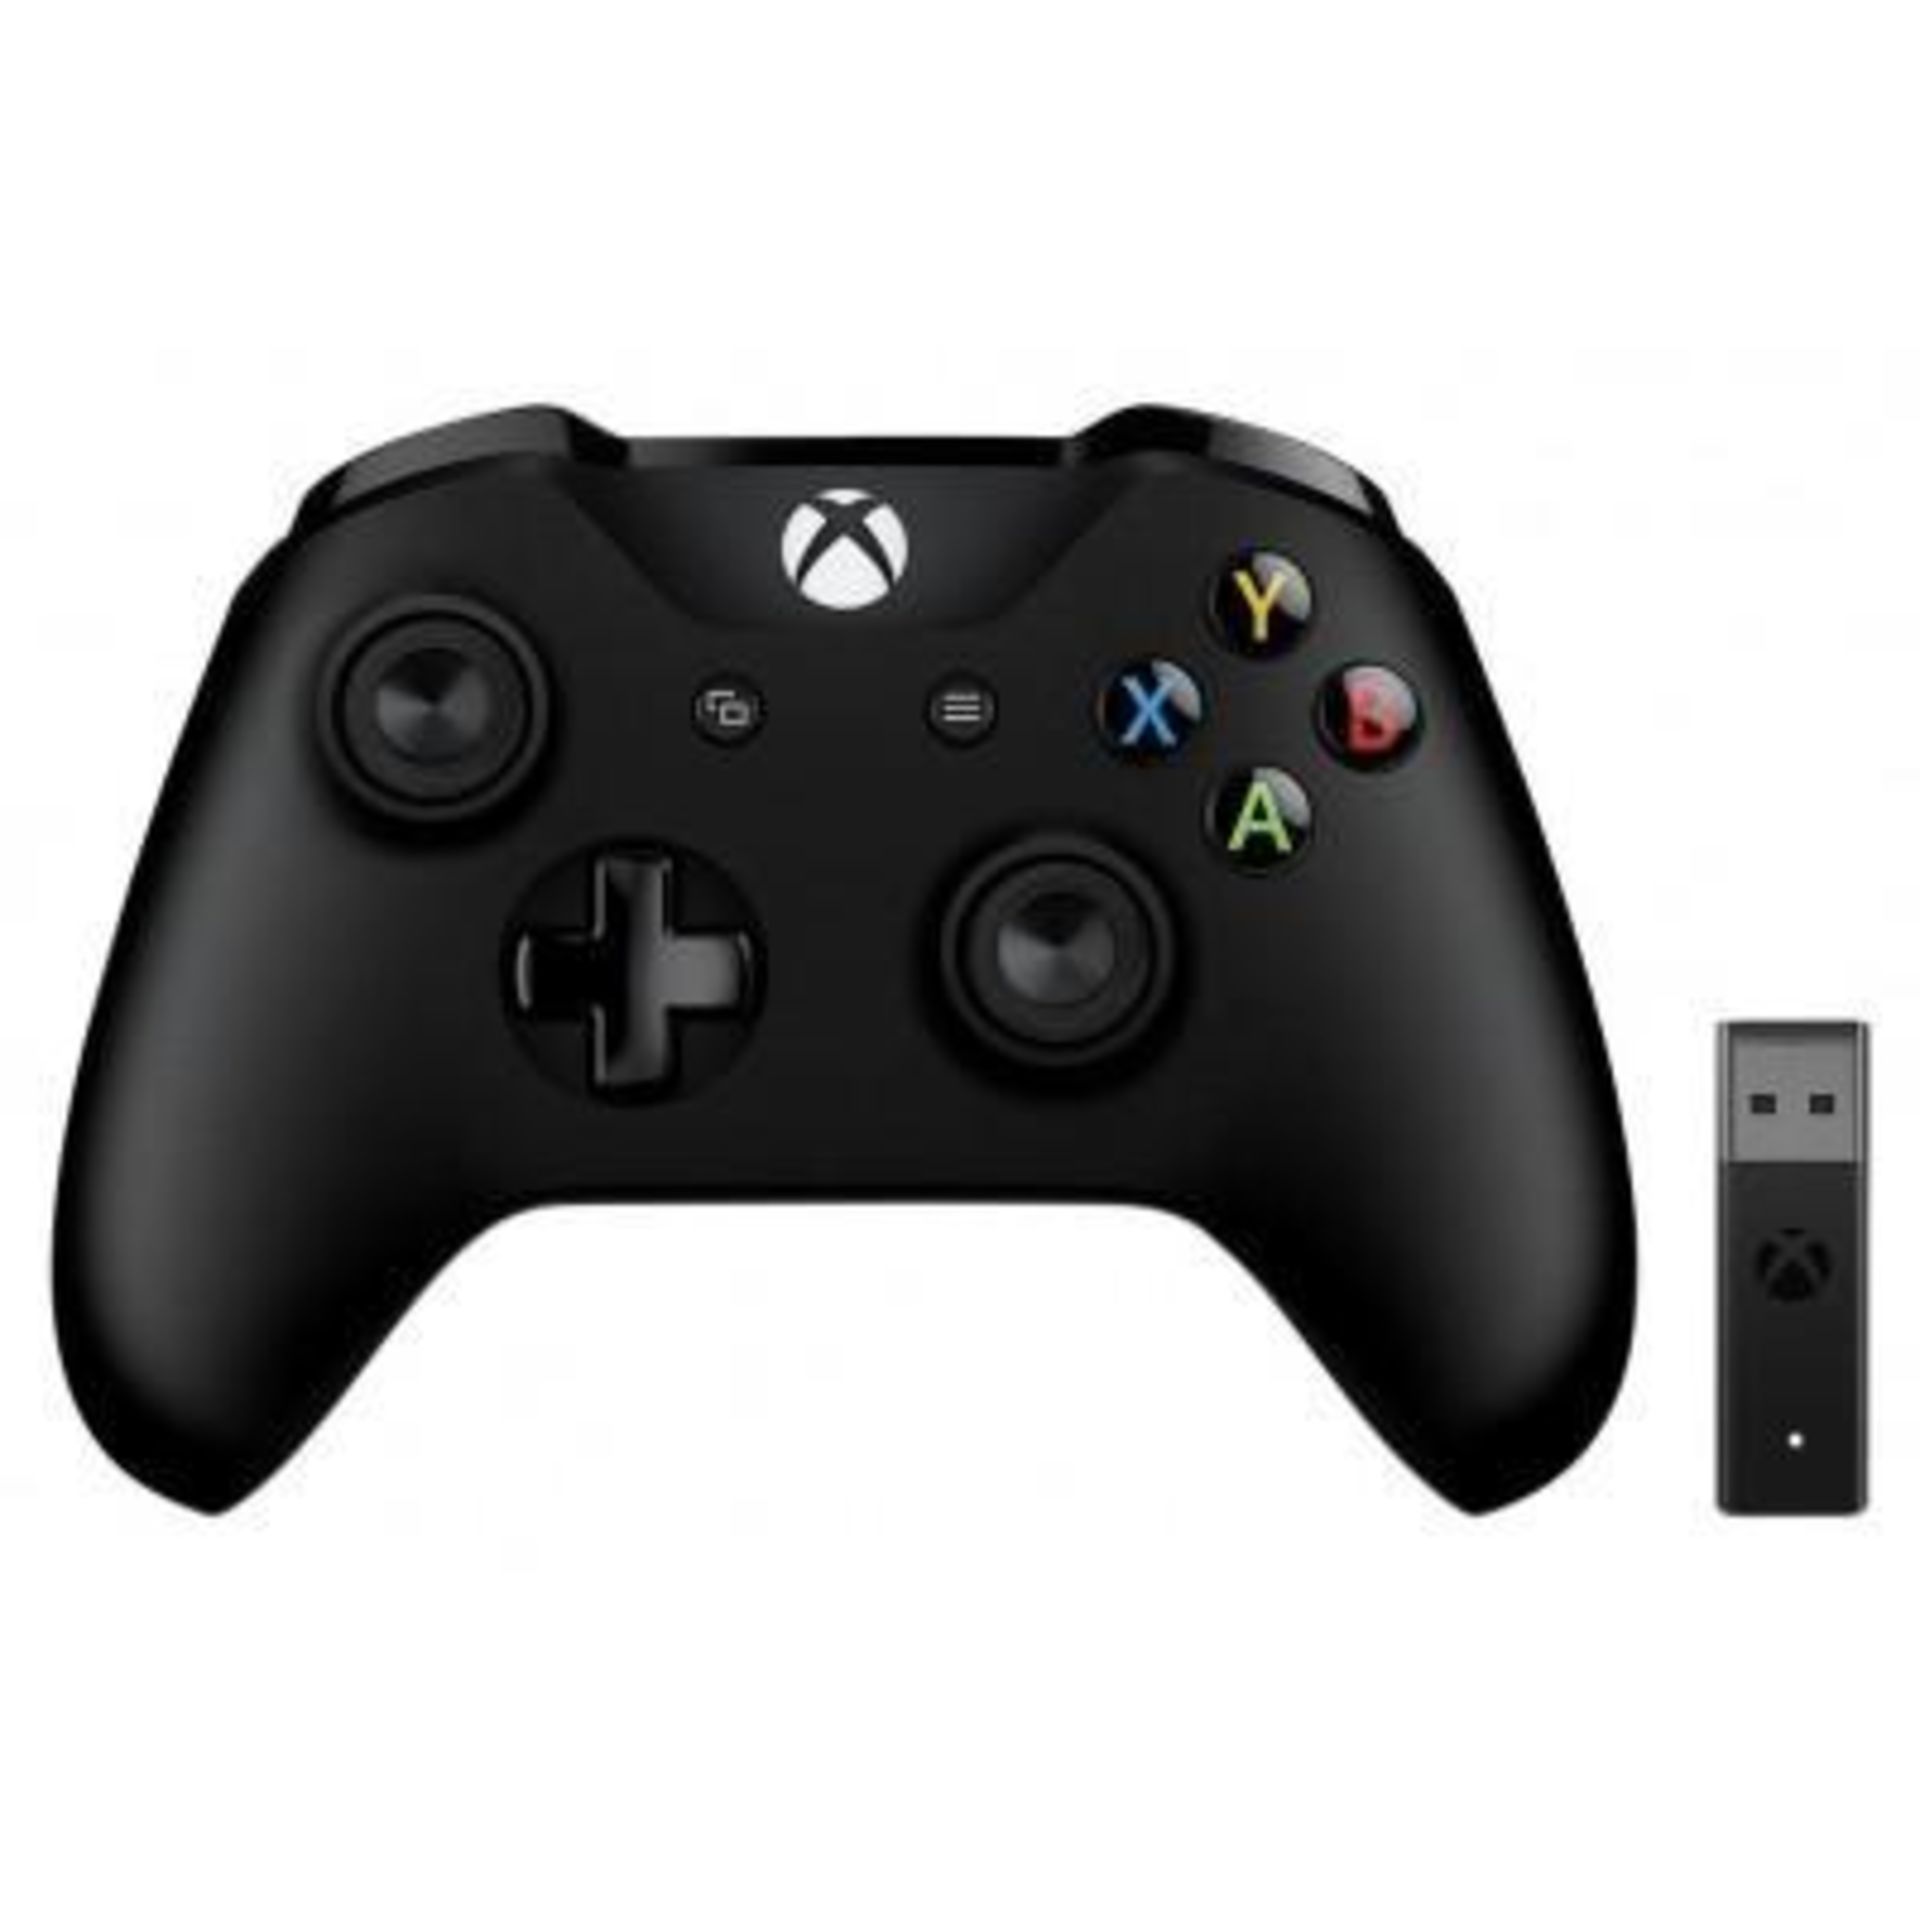 Xbox Controller with Wireless Adaptor - Black463/6504 £55.99 RRP